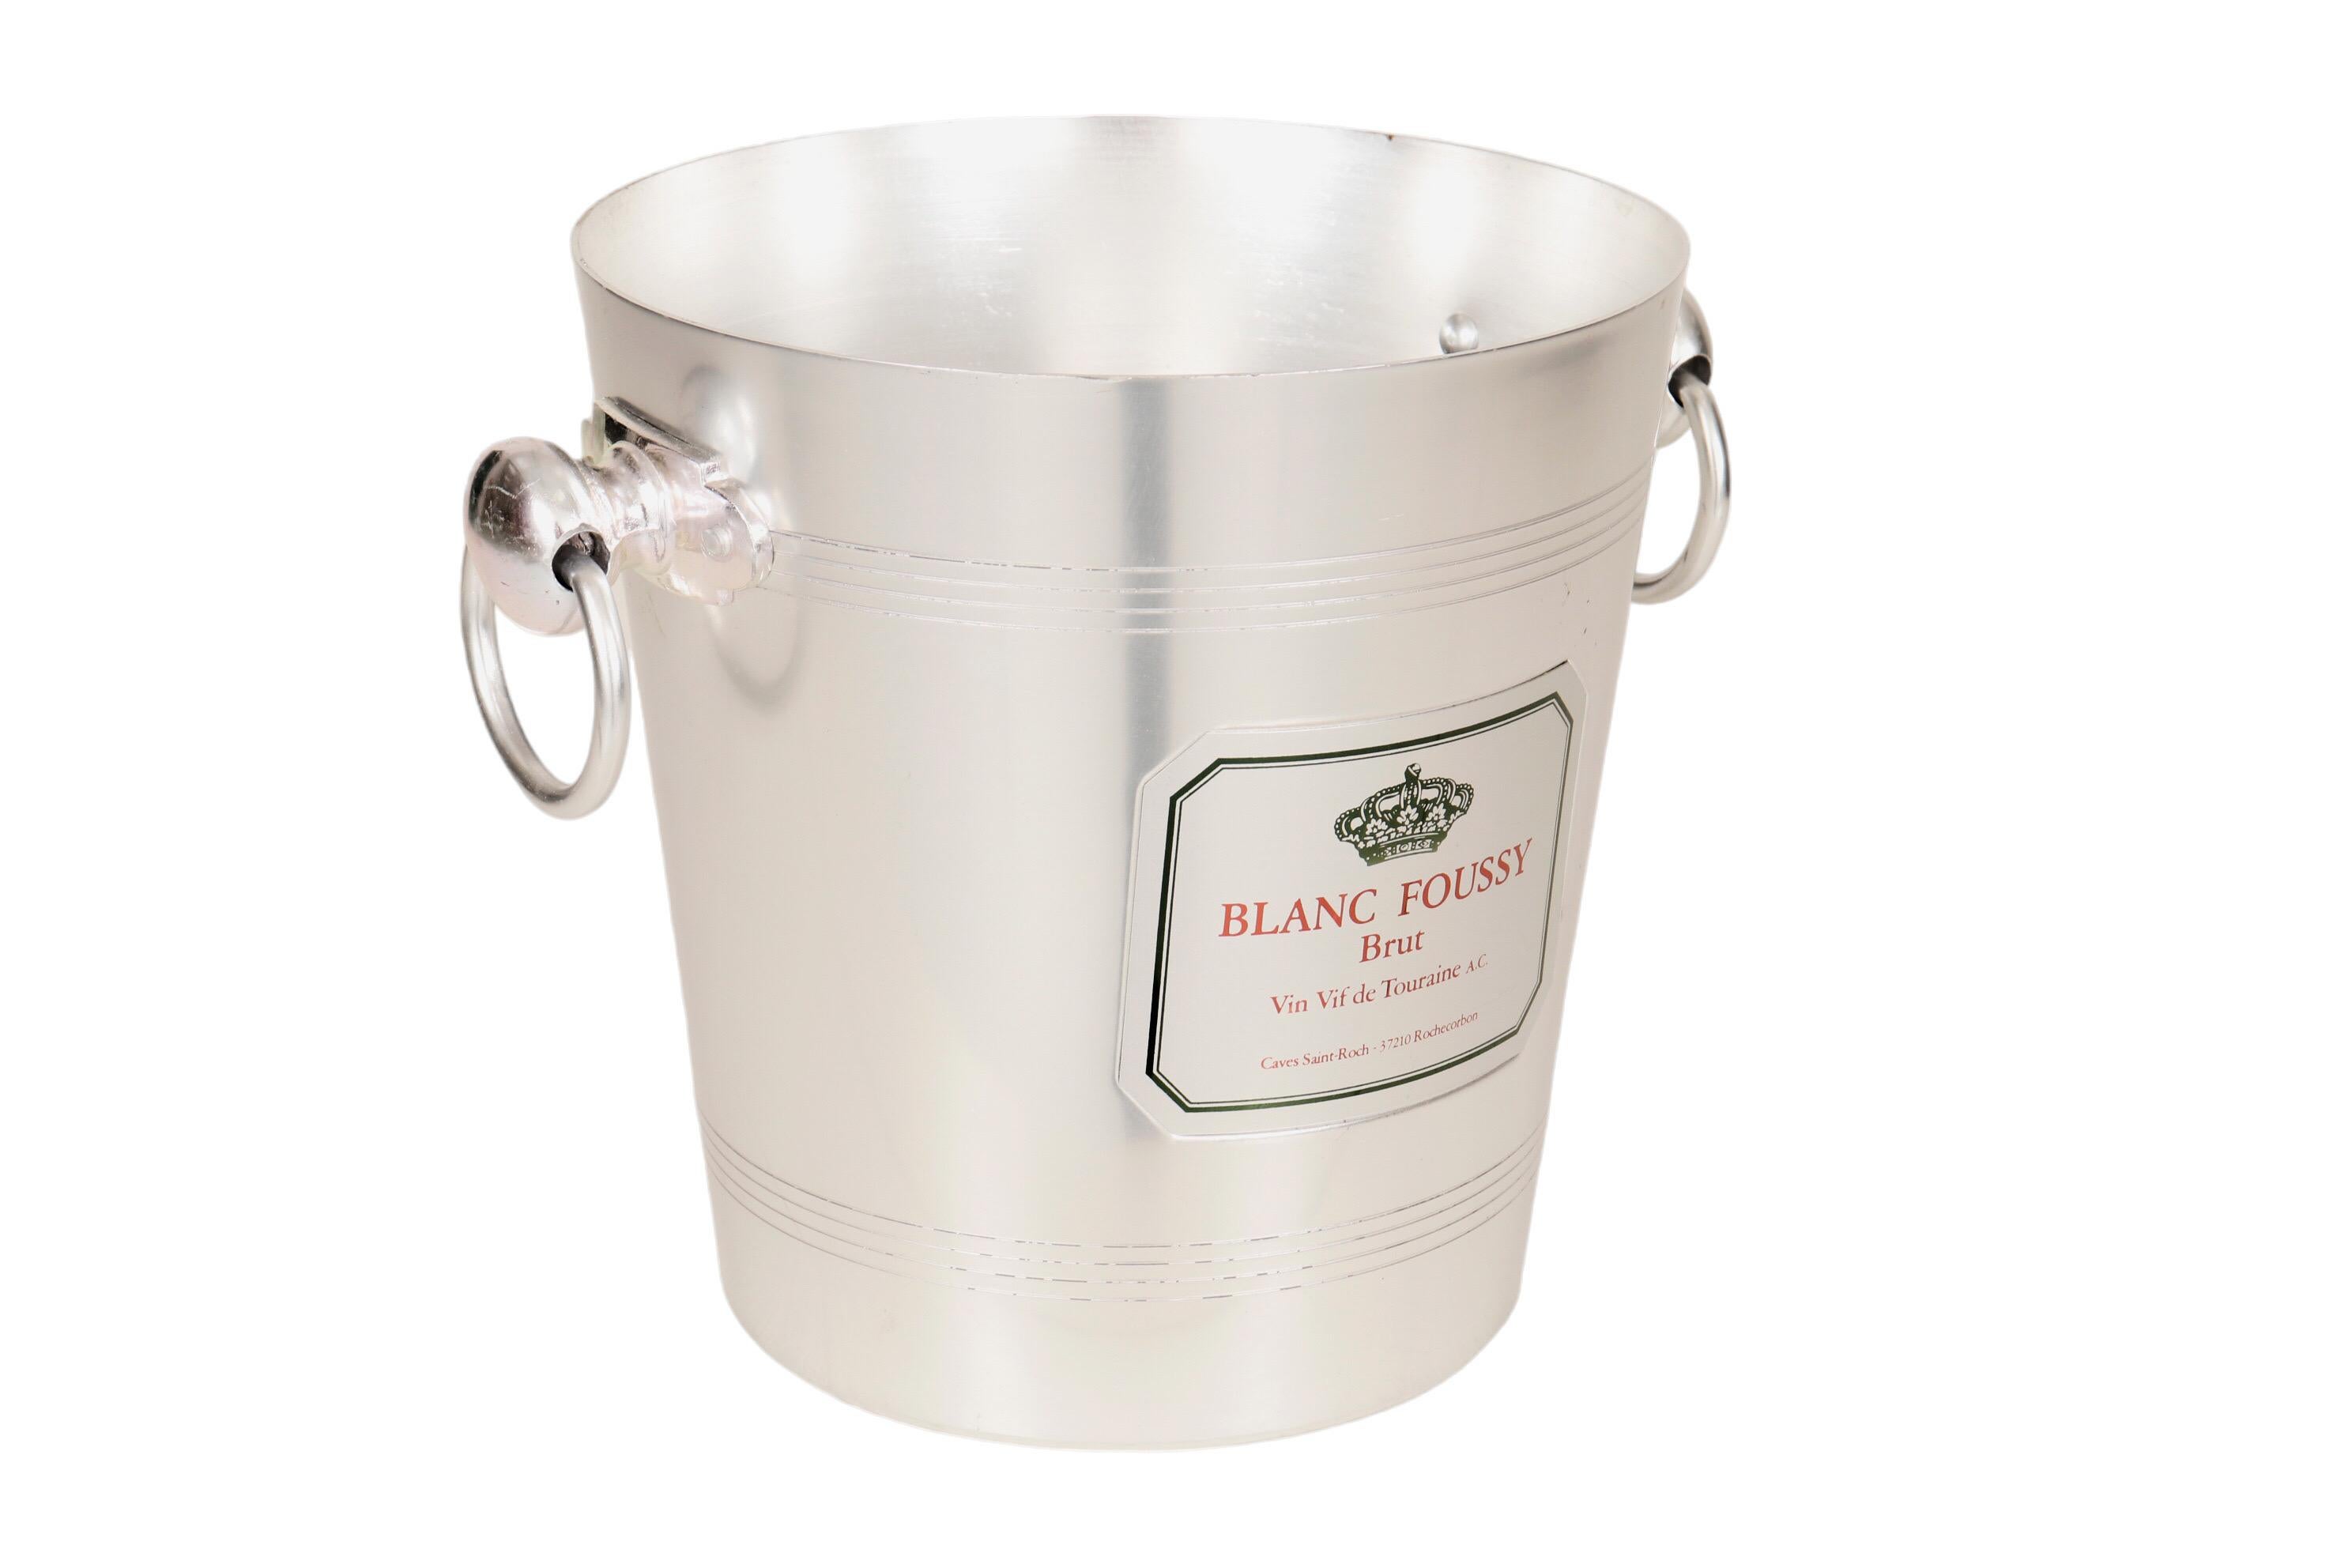 French Blanc Foussy Brut Champagne Bucket For Sale